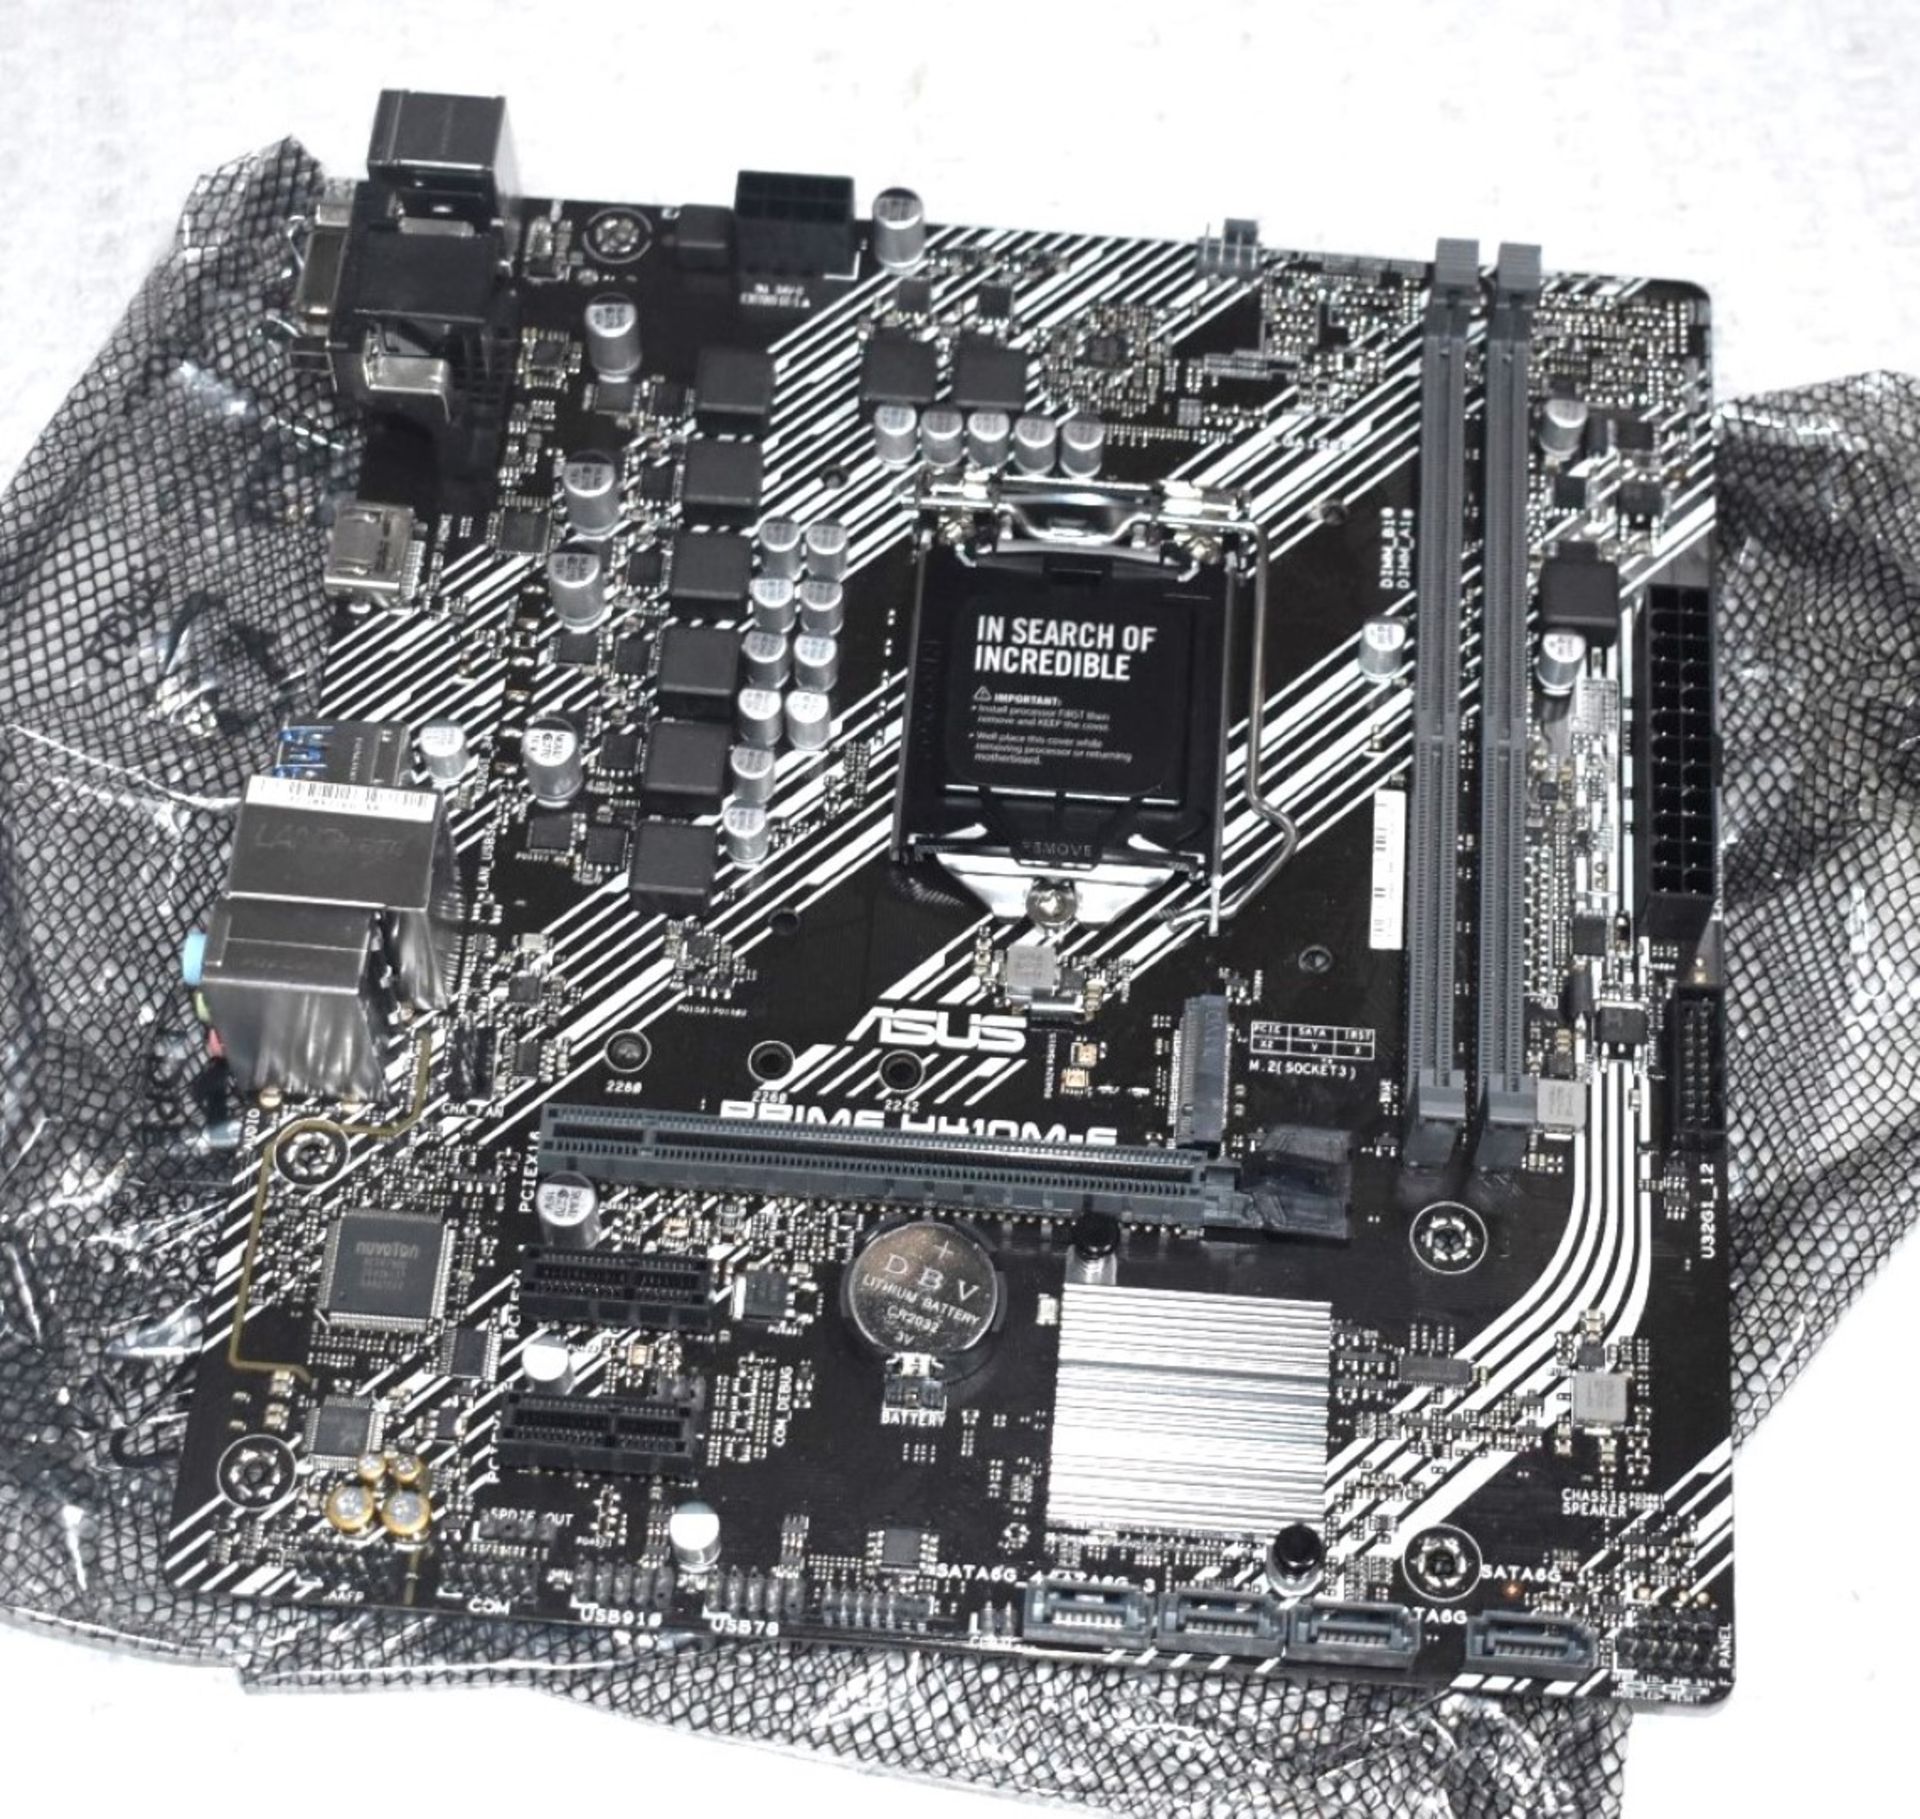 1 x Asus Prime H410M-E Intel LGA1200 Motherboard - Boxed With Accessories - Image 2 of 6